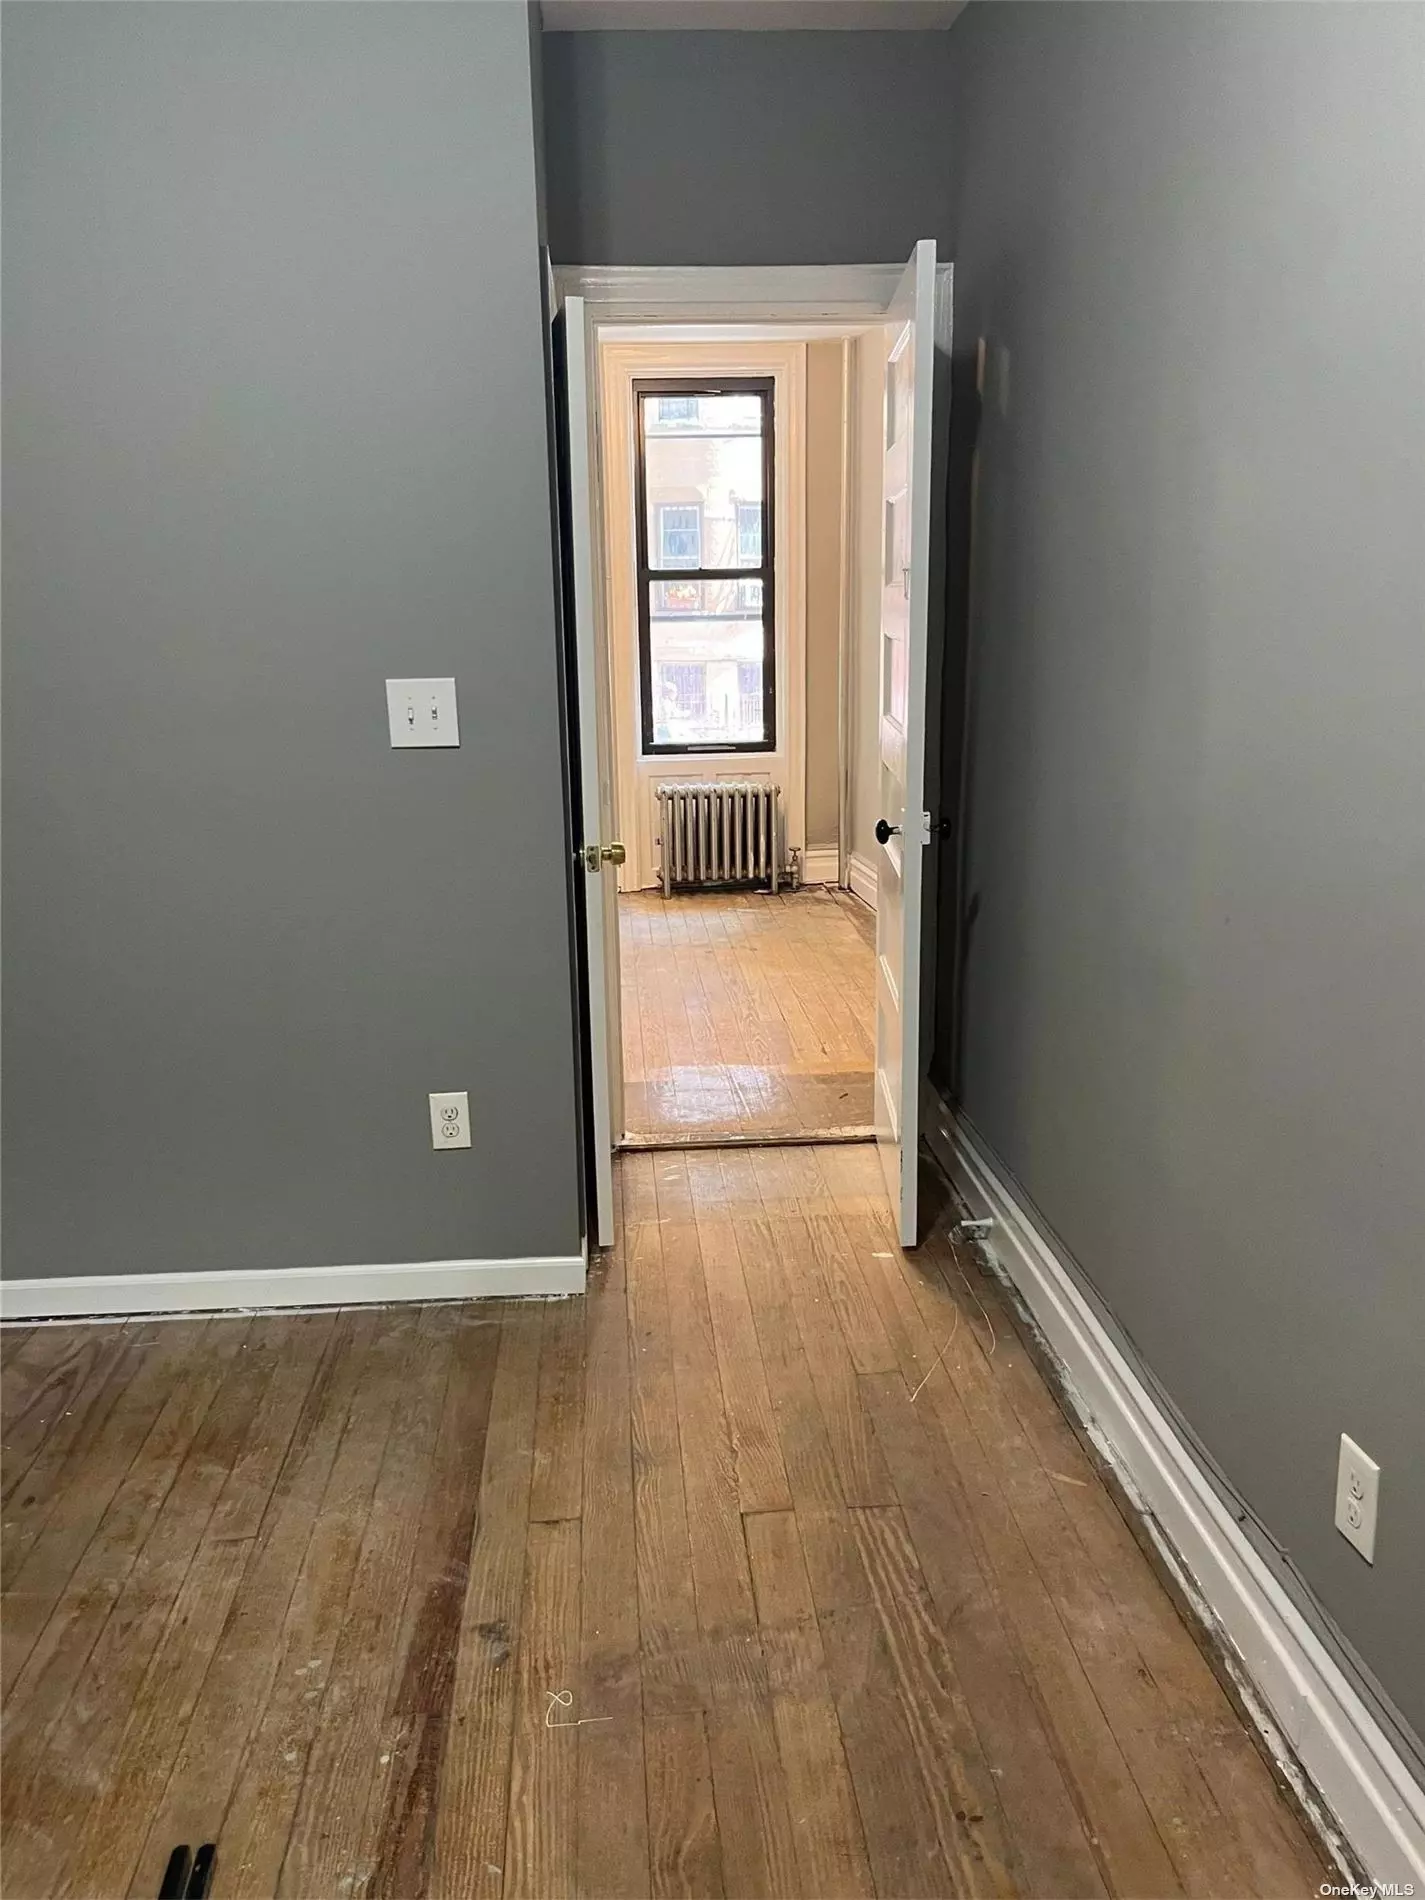 Renovated 2 bed 1 bath apt in Ridgewood Close to All!! 1st floor in Legal 6 family Must See Won&rsquo;t Last